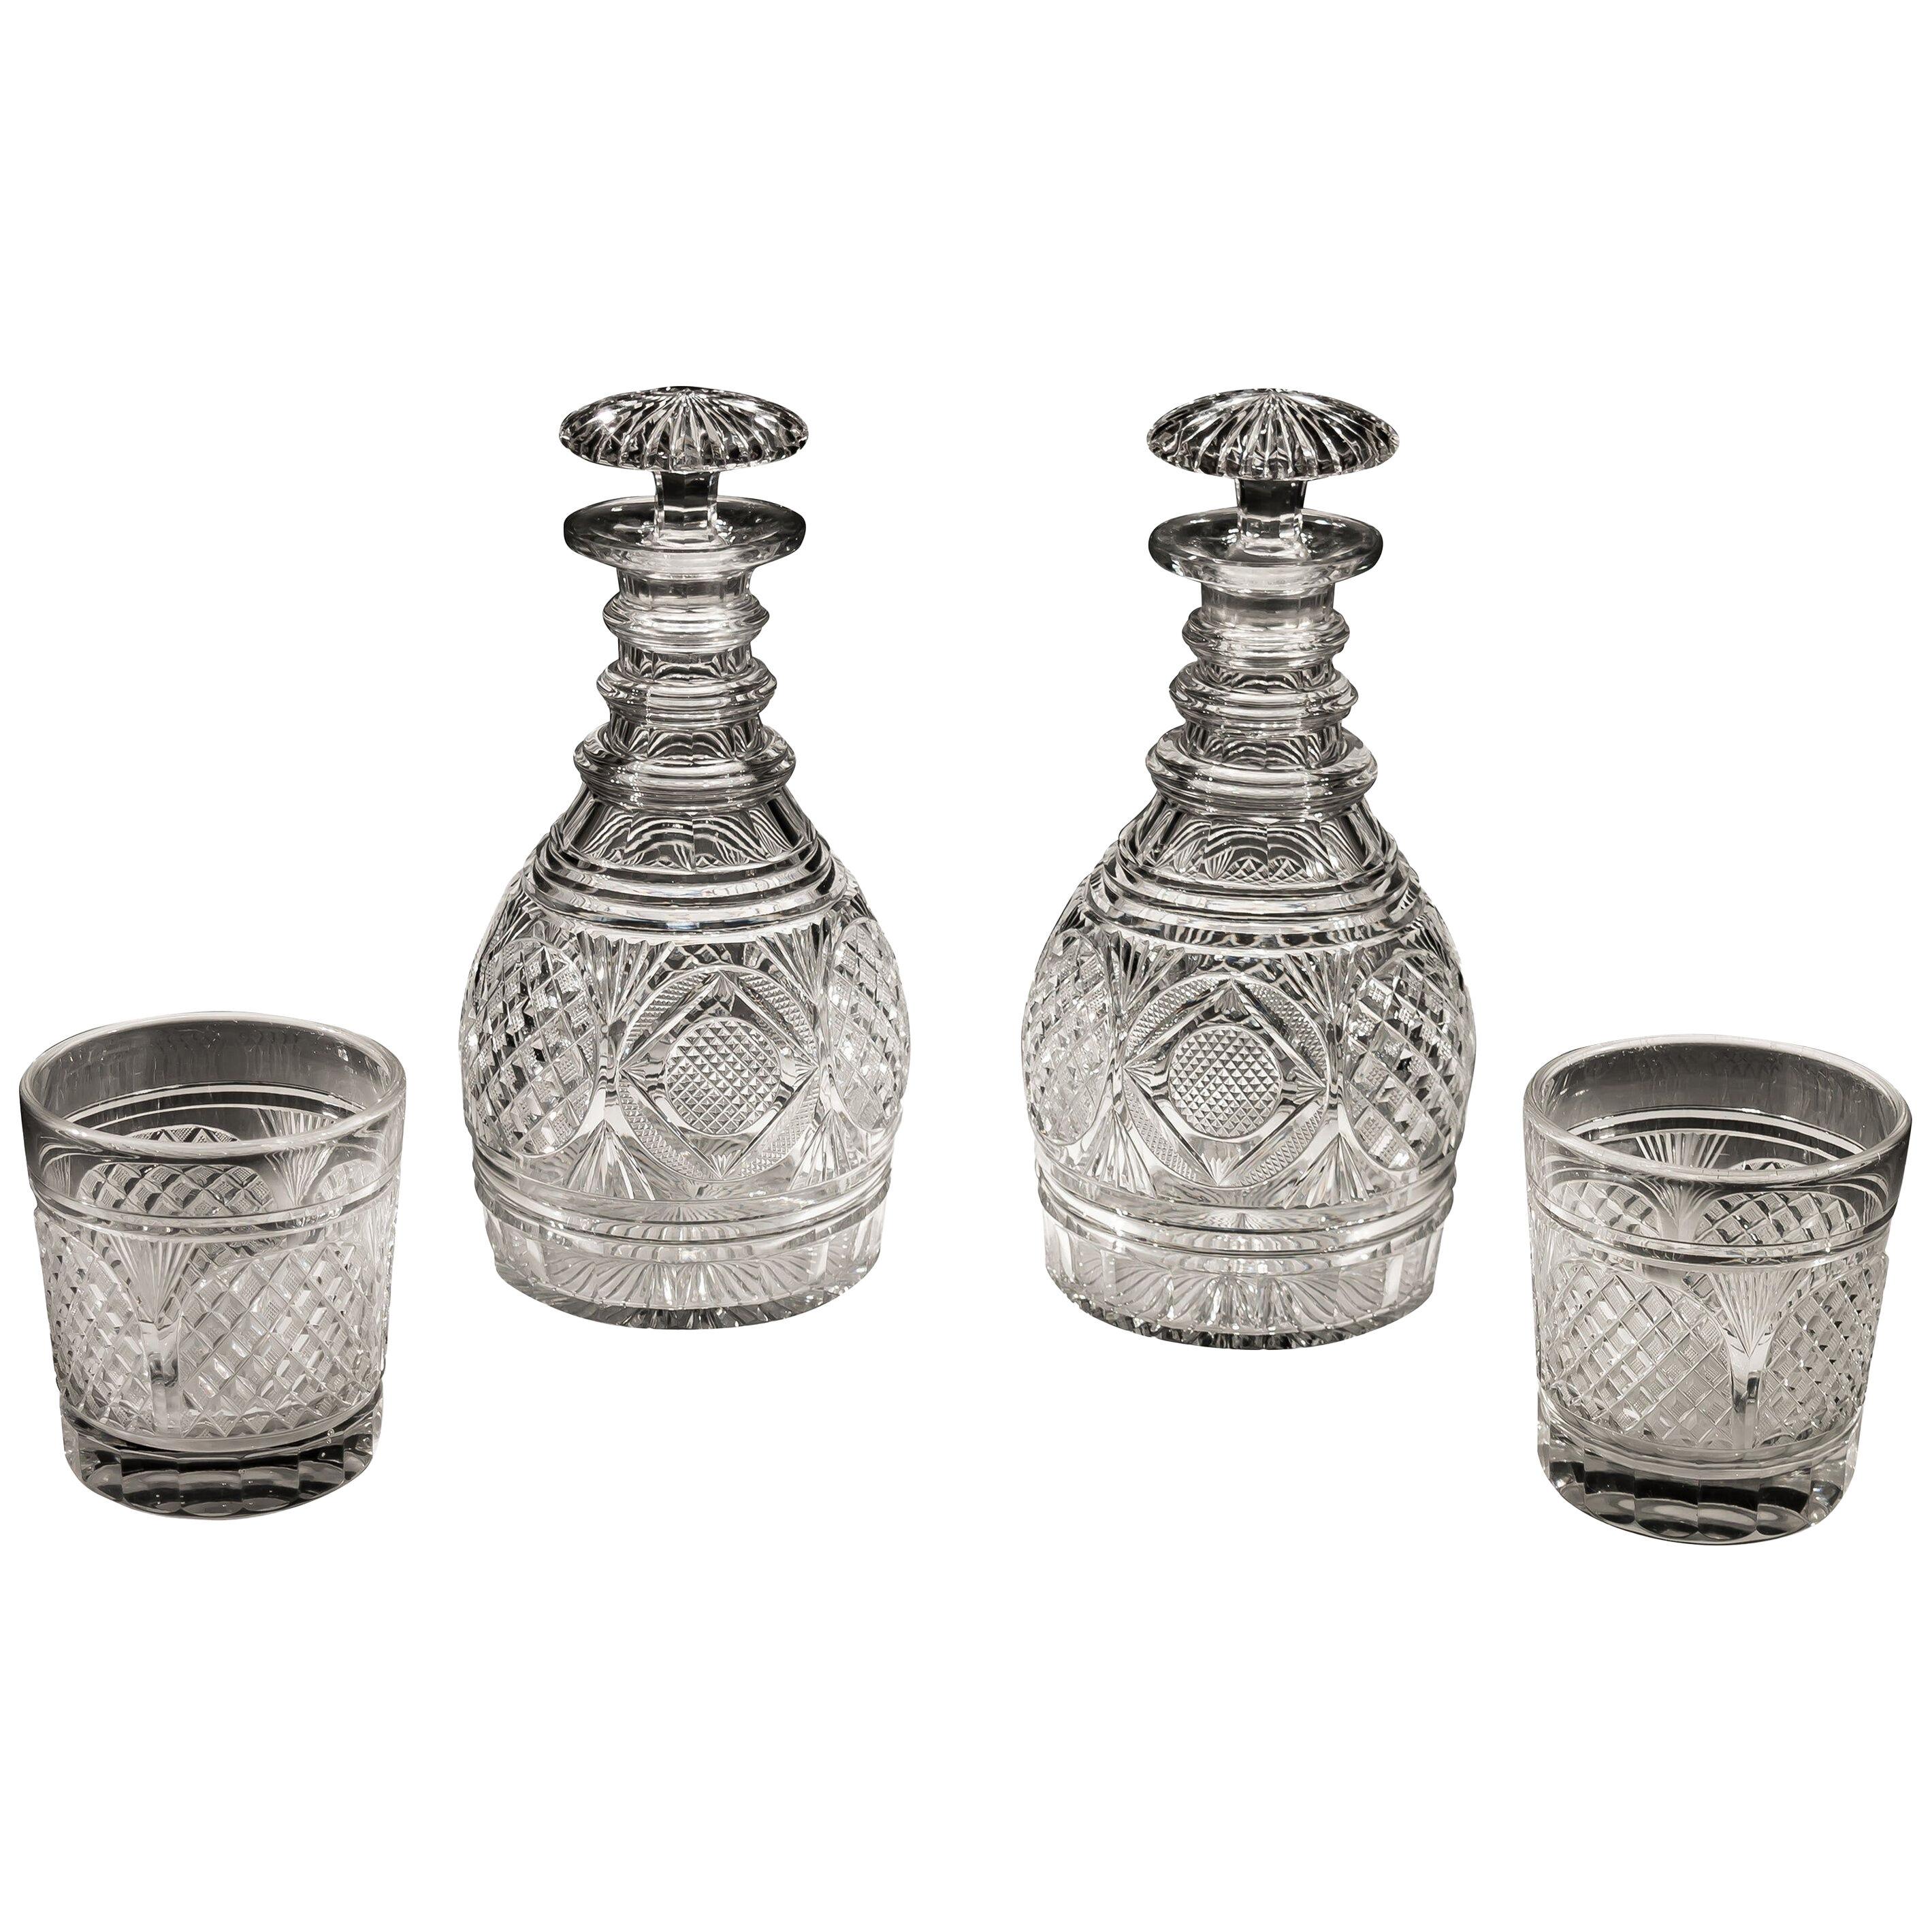 Exquisite Pair of Regency Cut Glass Decanters with Matching Tumblers